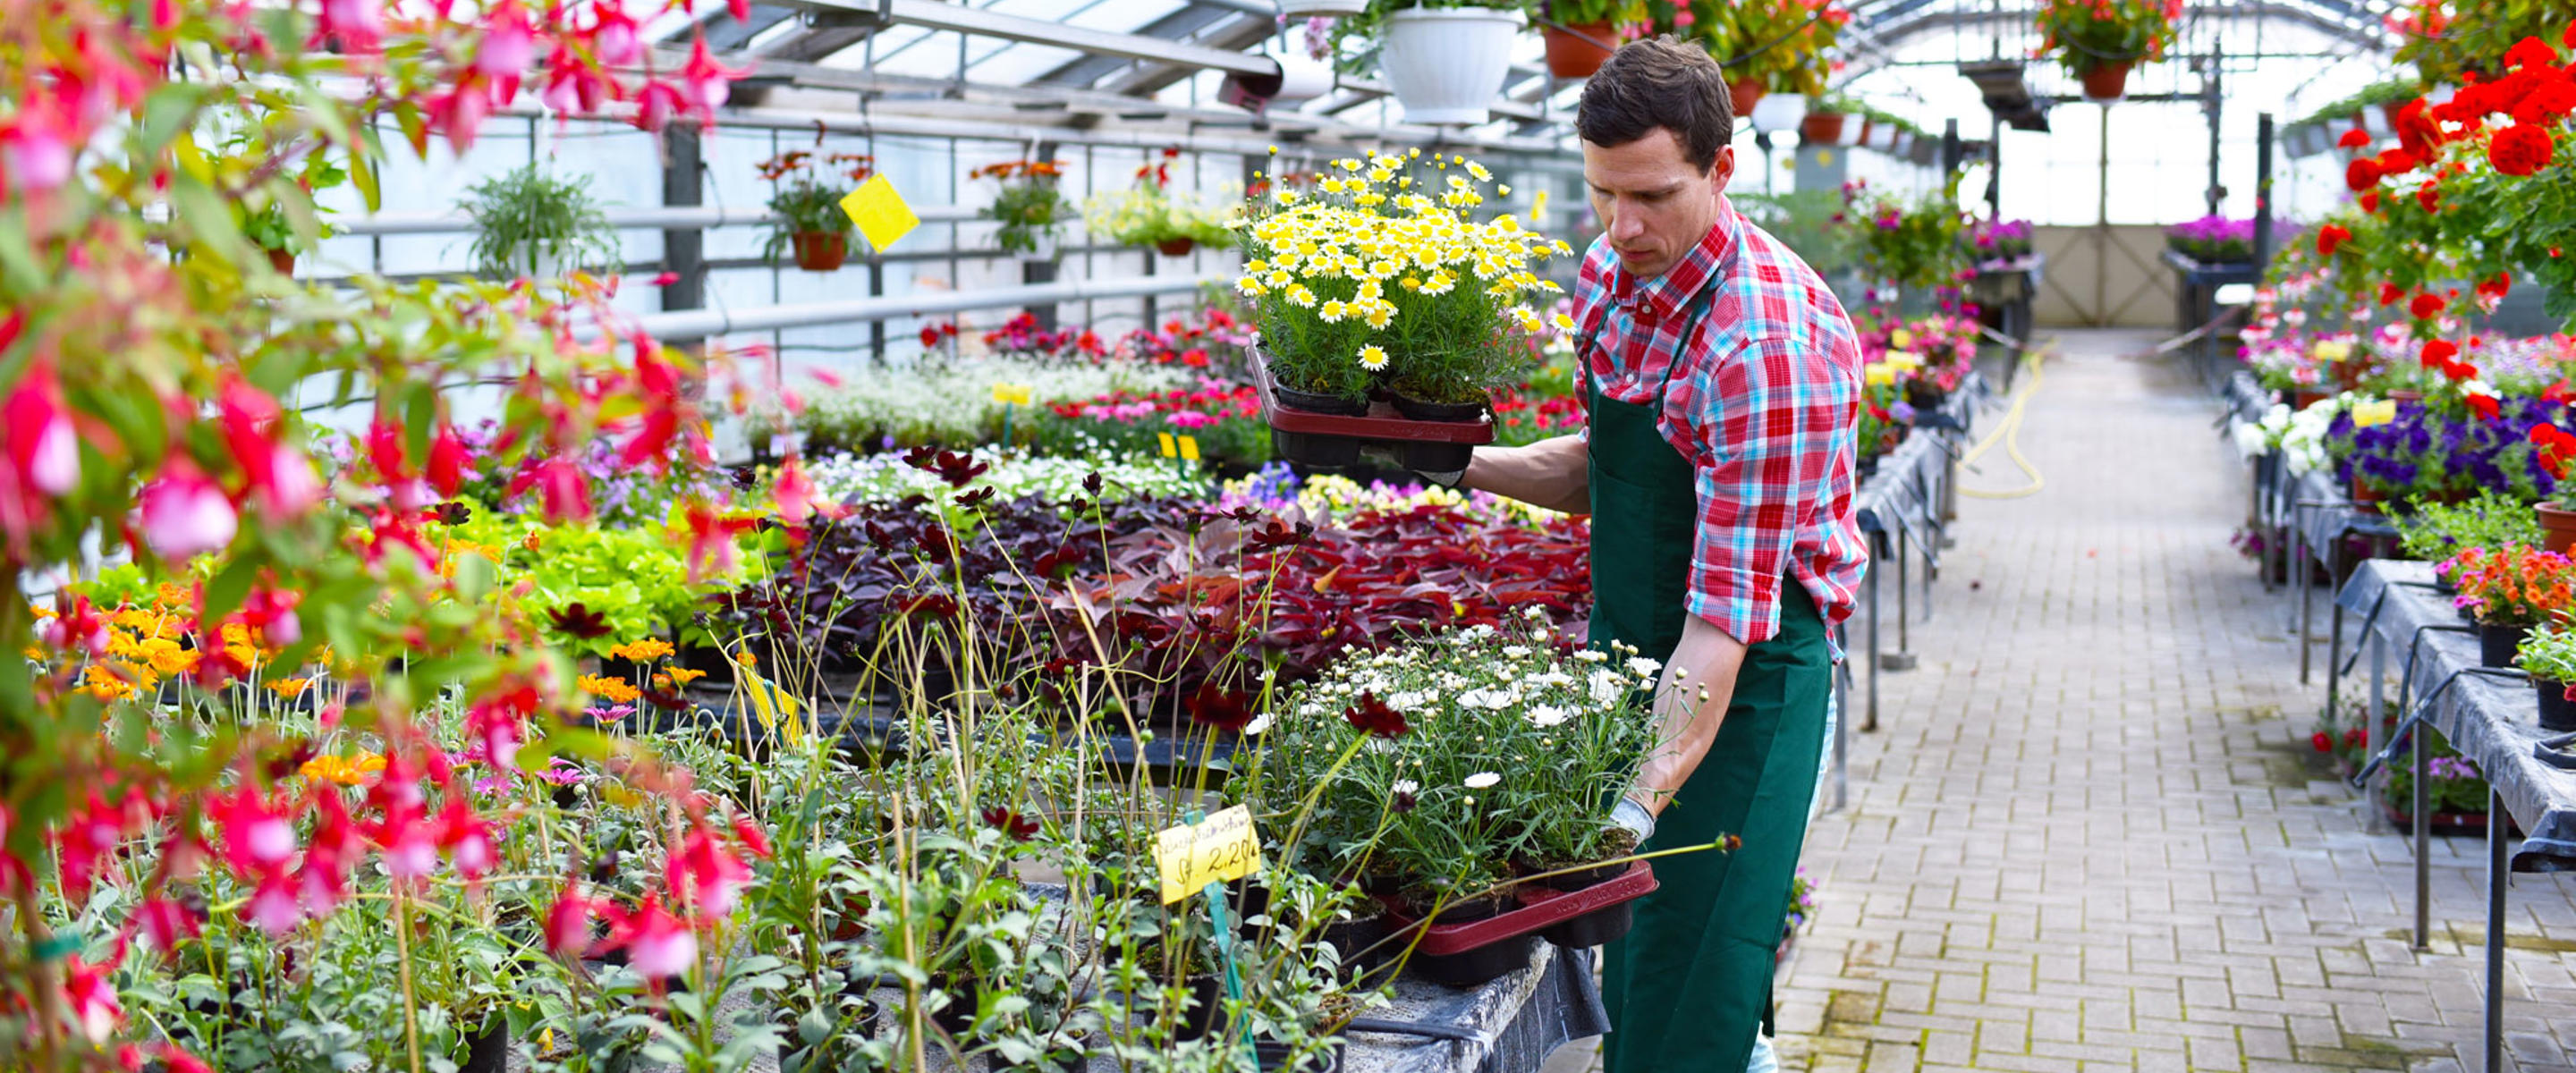 A person placing a tray of flowers down inside of a greenhouse full of other plants and flowers